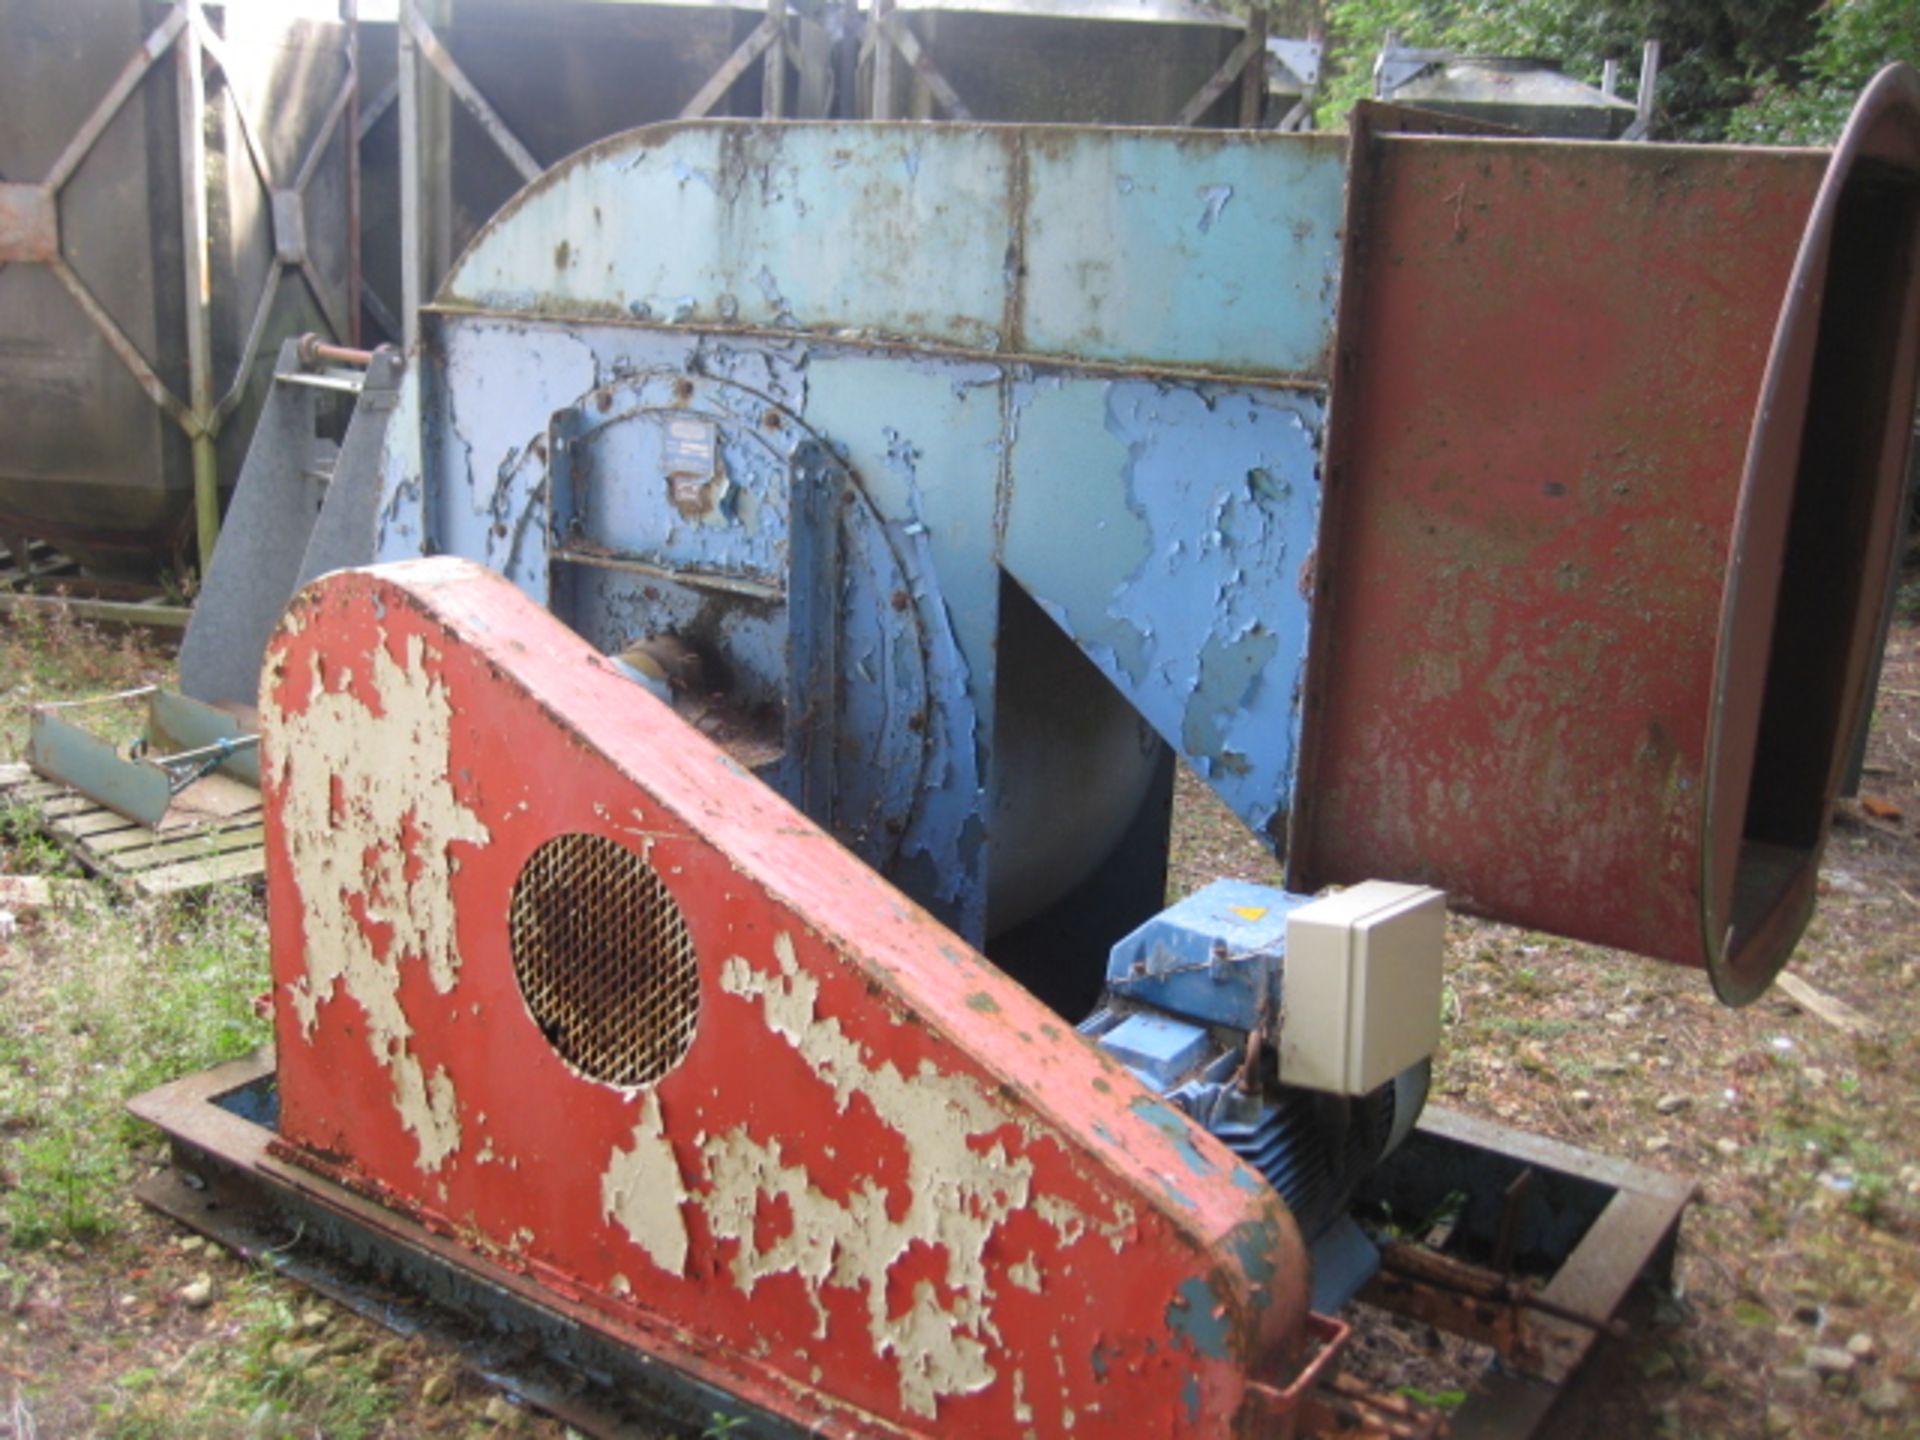 Provenair 30B Centrifugal Belt Driven Fan, size C75, with 30kW motor, loading free of charge -